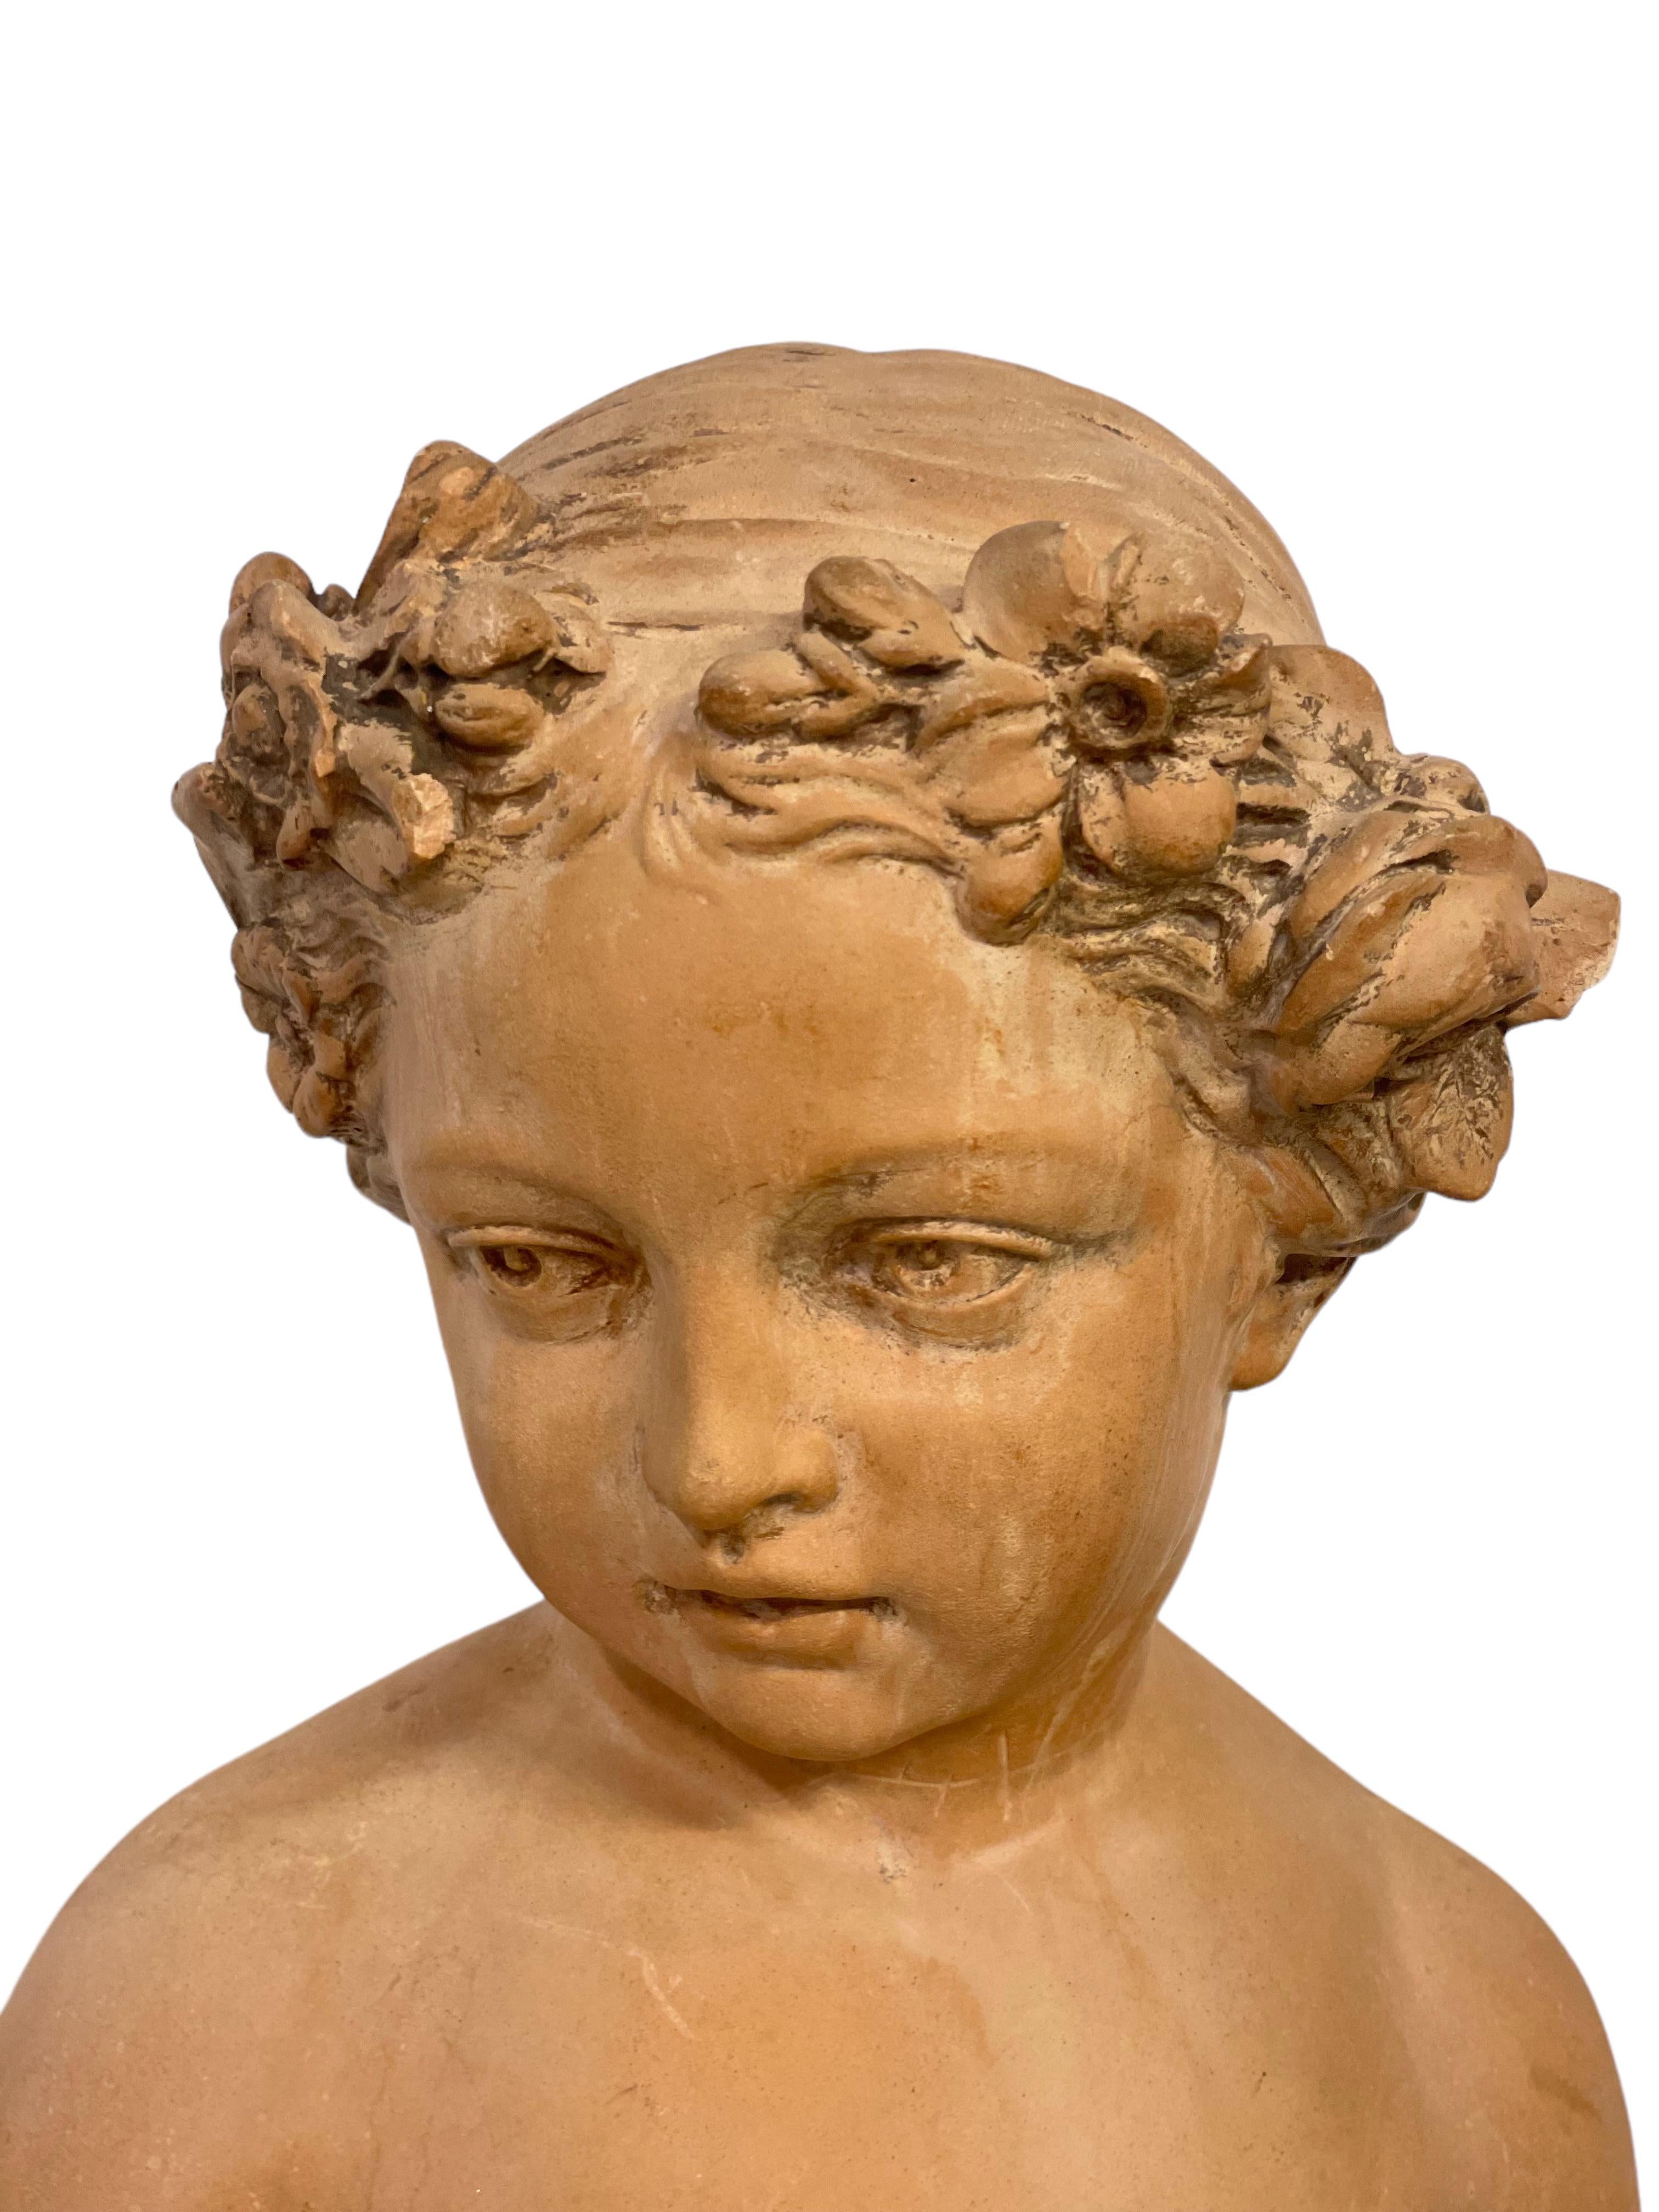 A delightful and finely detailed 18th century-style French terracotta bust of a young maiden with a wreath of flowers in her hair. This charming piece of sculpture is raised on an elegant mottled green marble plinth, and is inspired by the work of